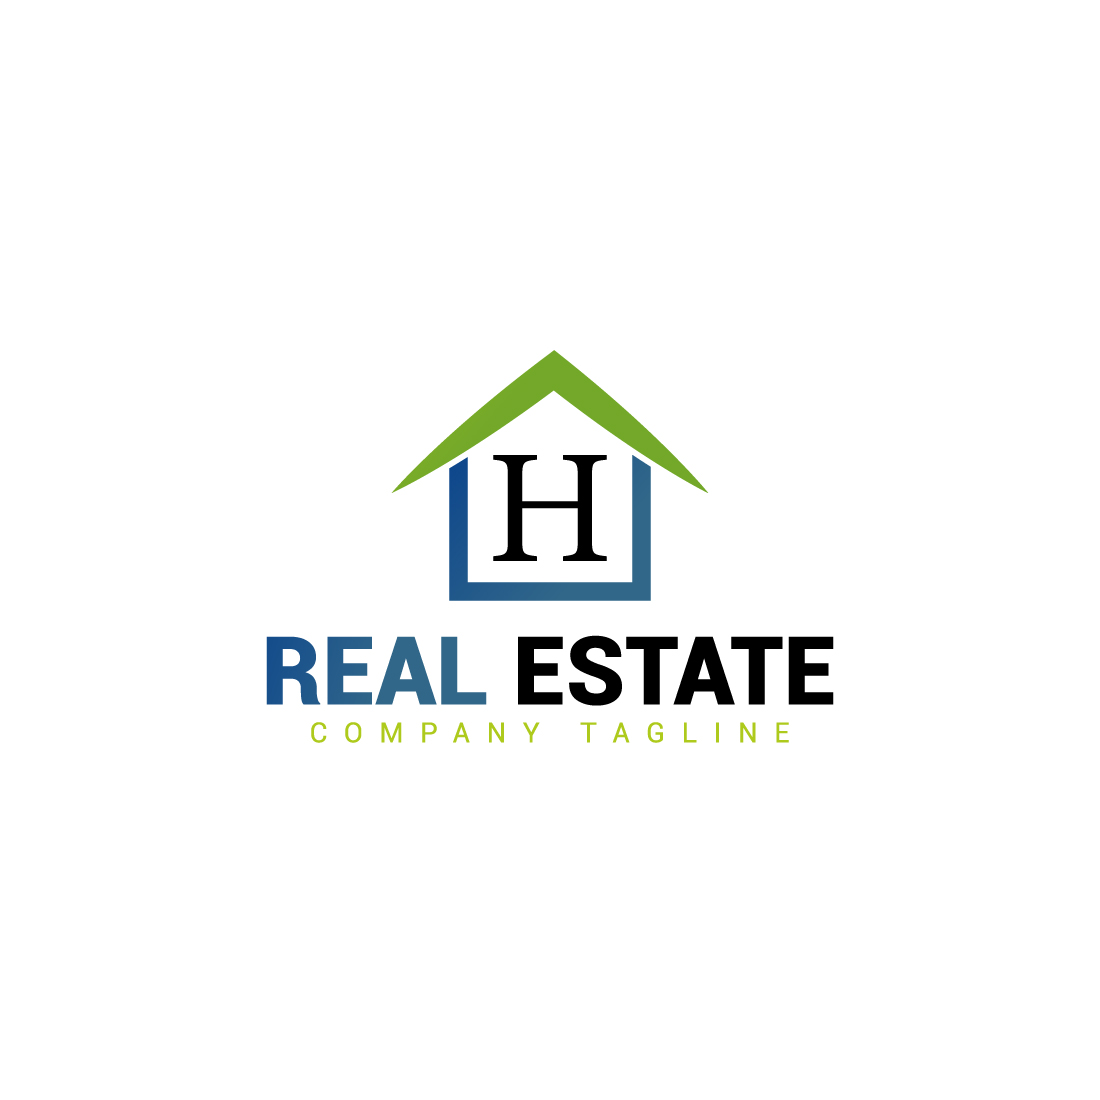 Real estate logo with green, dark blue color and H letter preview image.